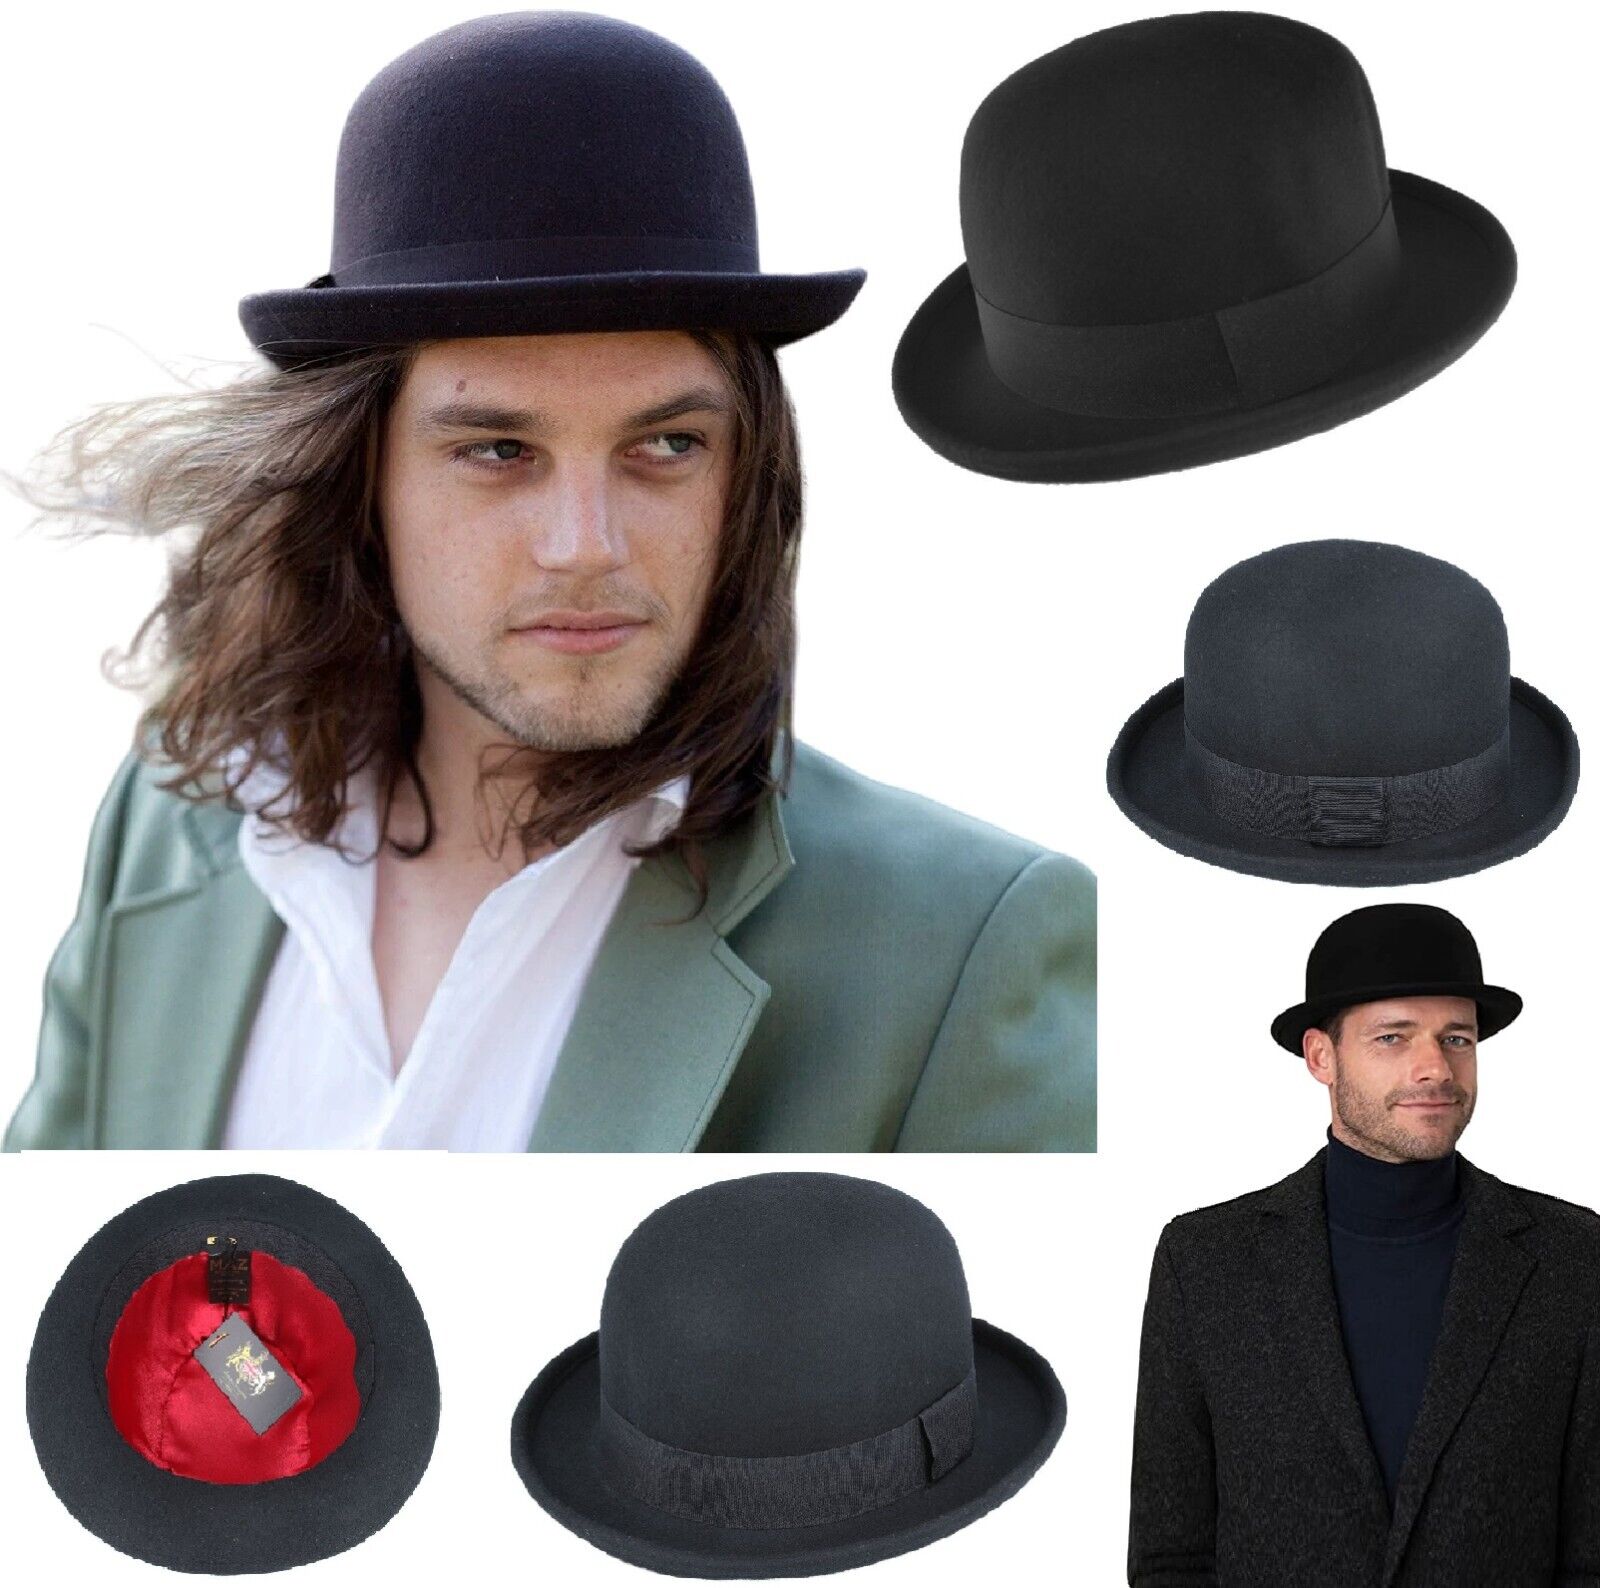 Bowler Hat Men’s Crushable Wool Soft Unisex Black Satin Lined Round Derby Hats